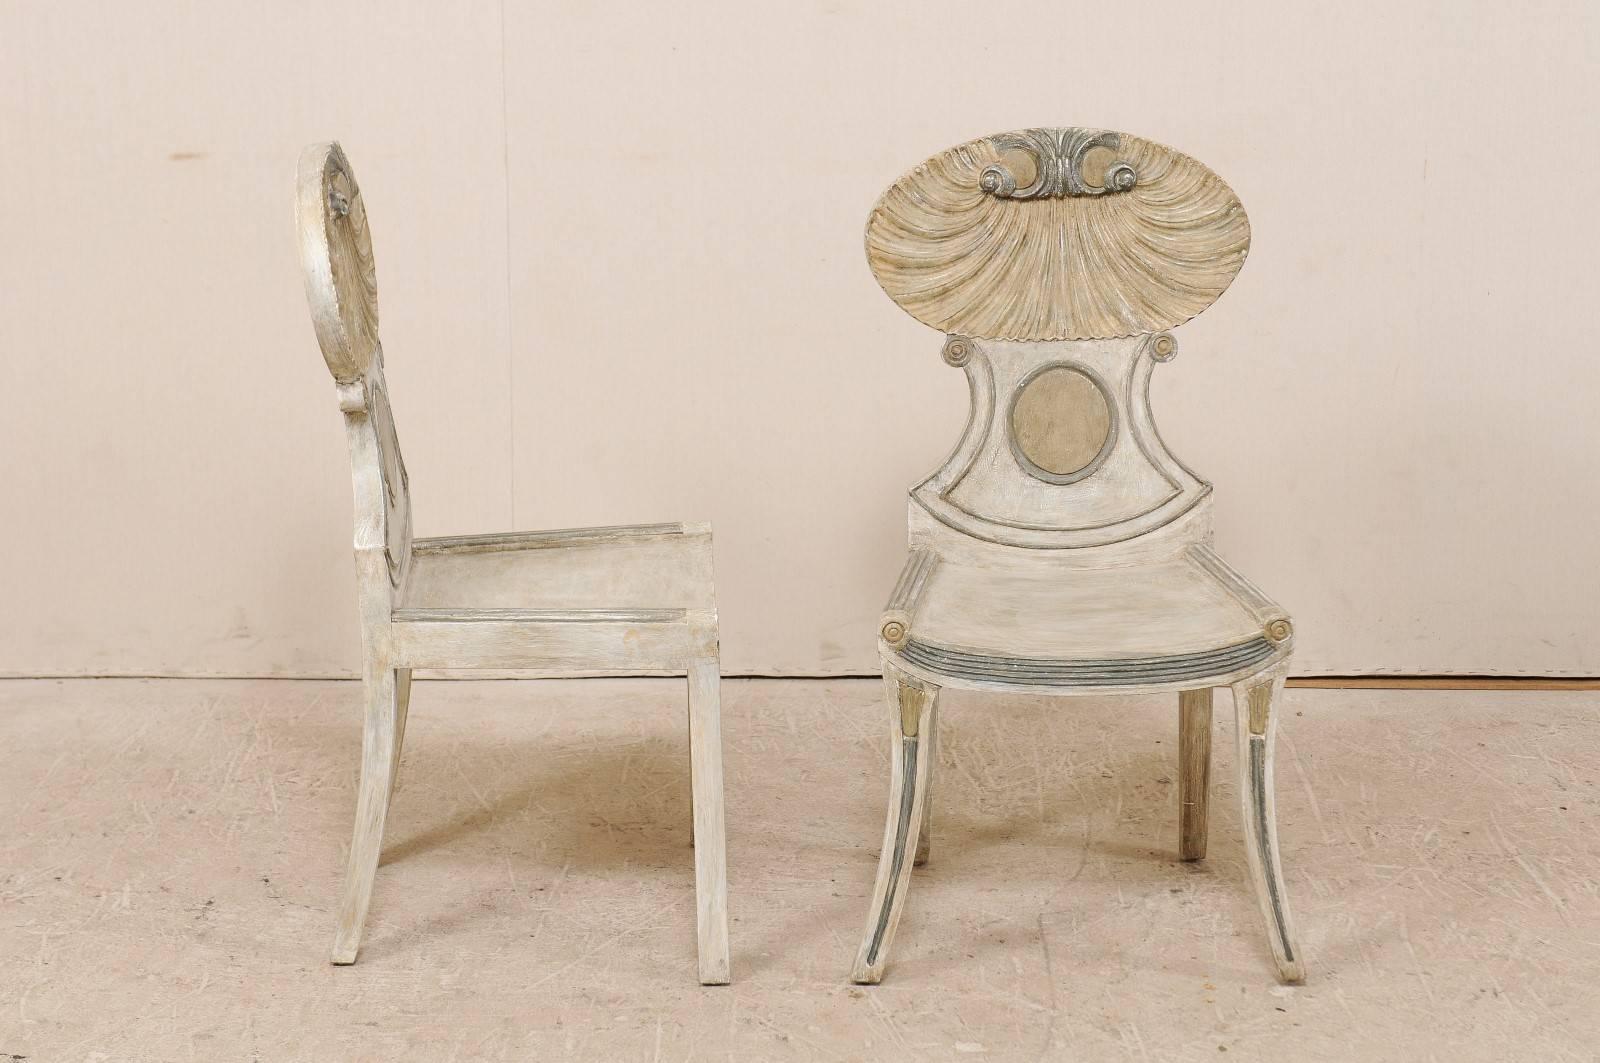 20th Century Pair of Vintage Grotto Painted Beige Wood Chairs with Carved Shell Motifs